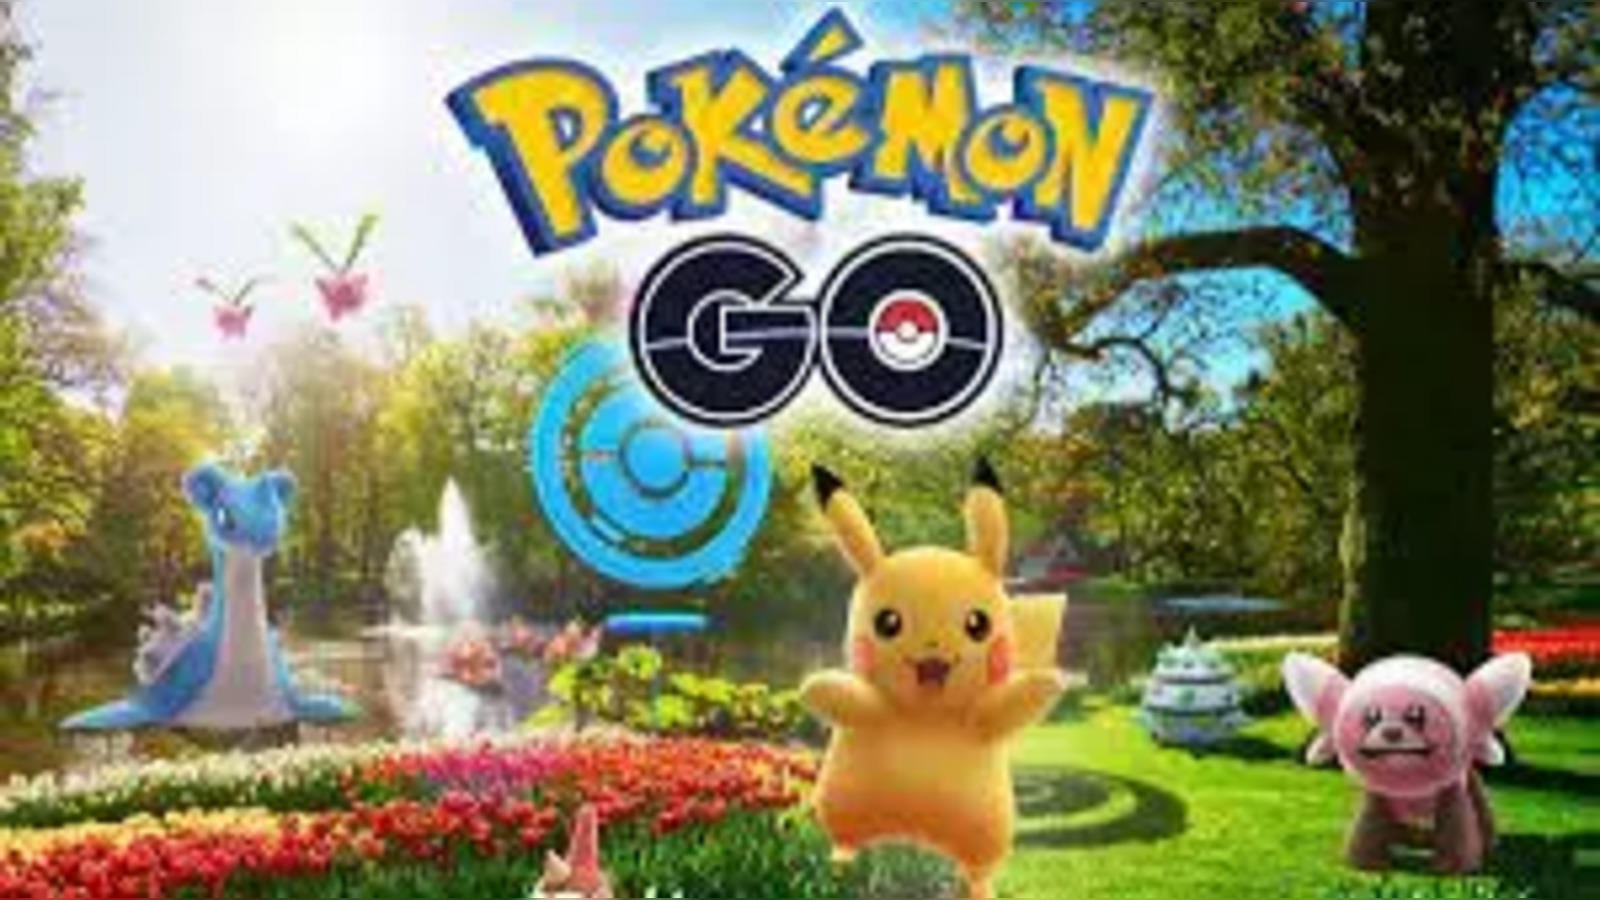 Pokemon GO Adventure Week 2023: Pokemon GO Adventure Week 2023: Do you know  the best Pokemon to watch out for? Here's the full list - The Economic Times